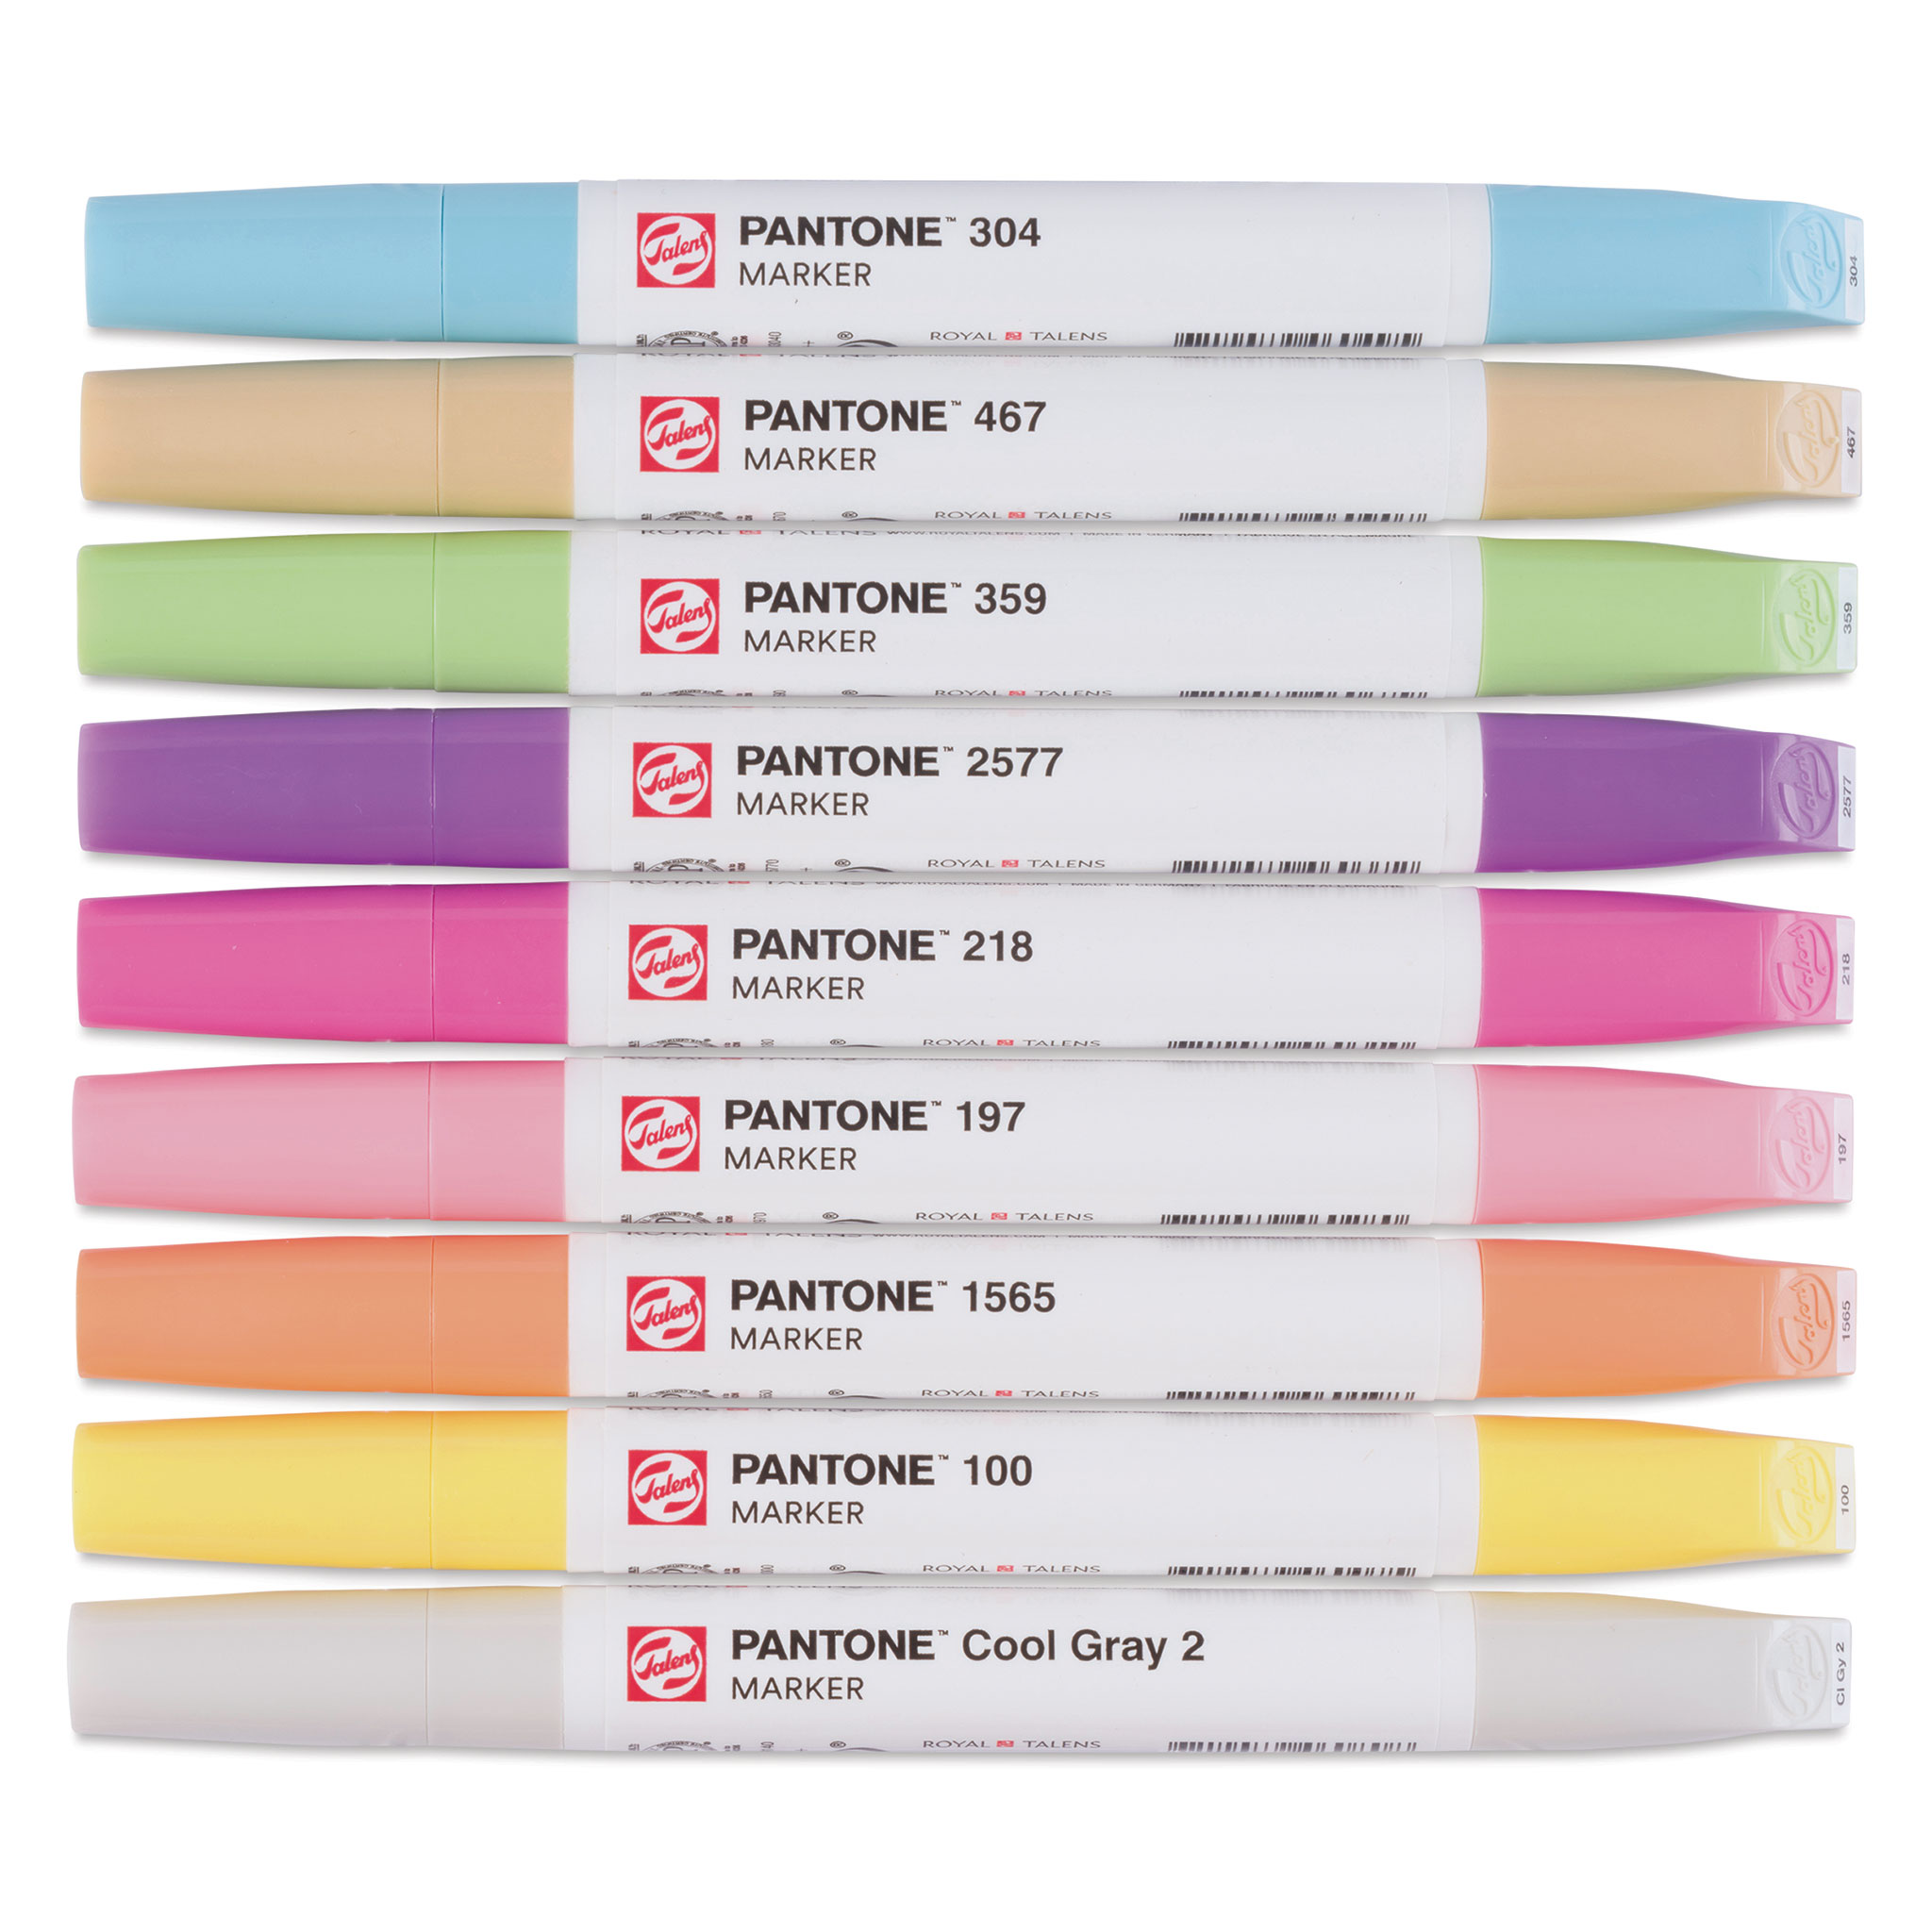 Pantone Dual Tip Markers and Sets